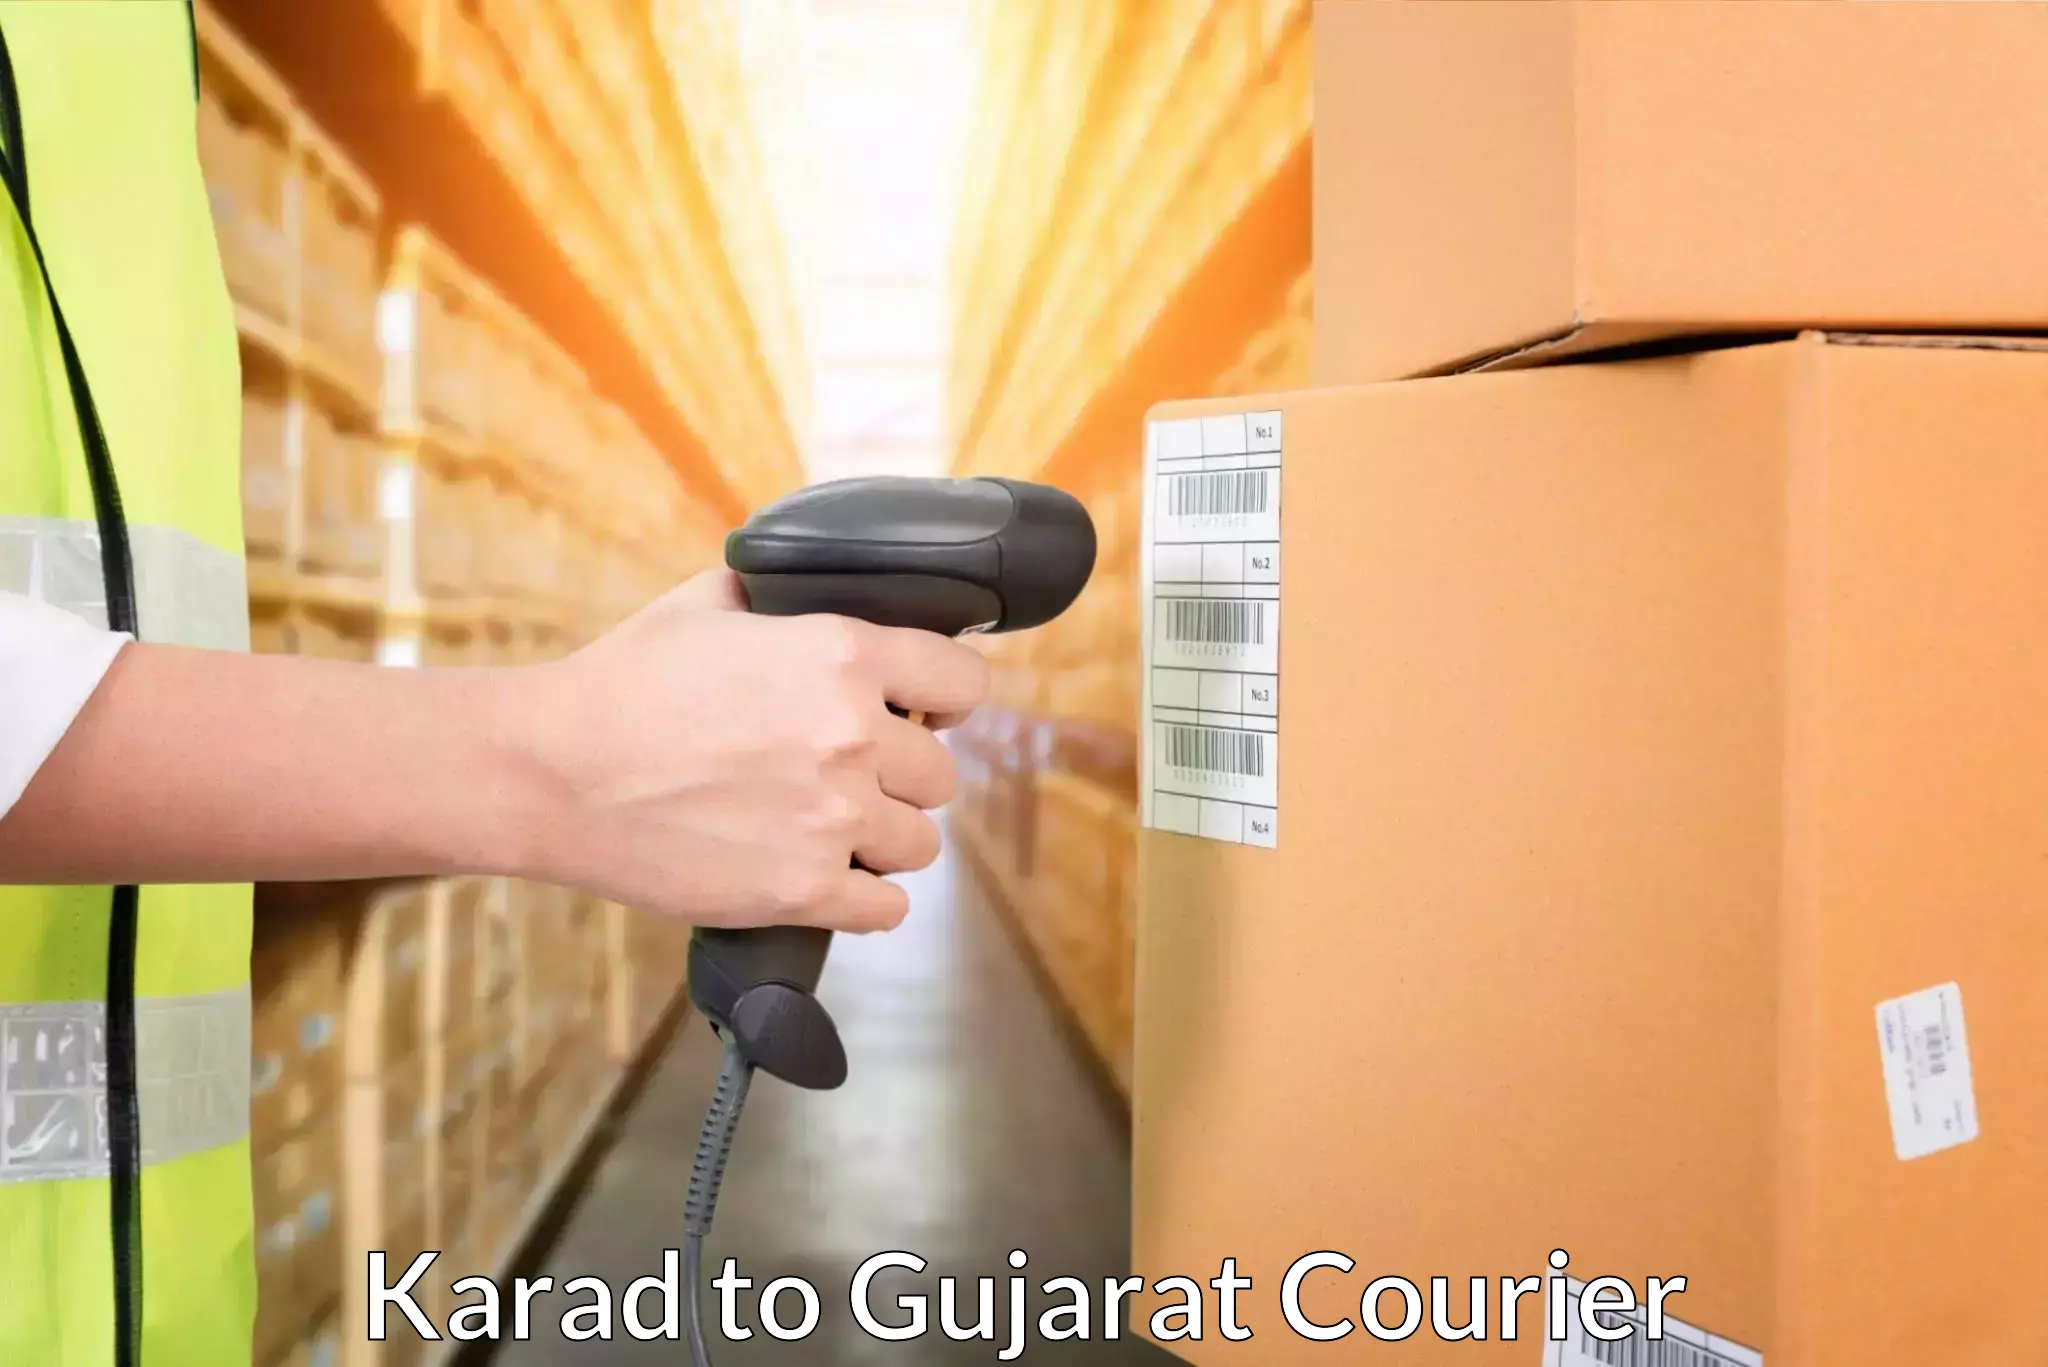 Global shipping solutions Karad to Sanand